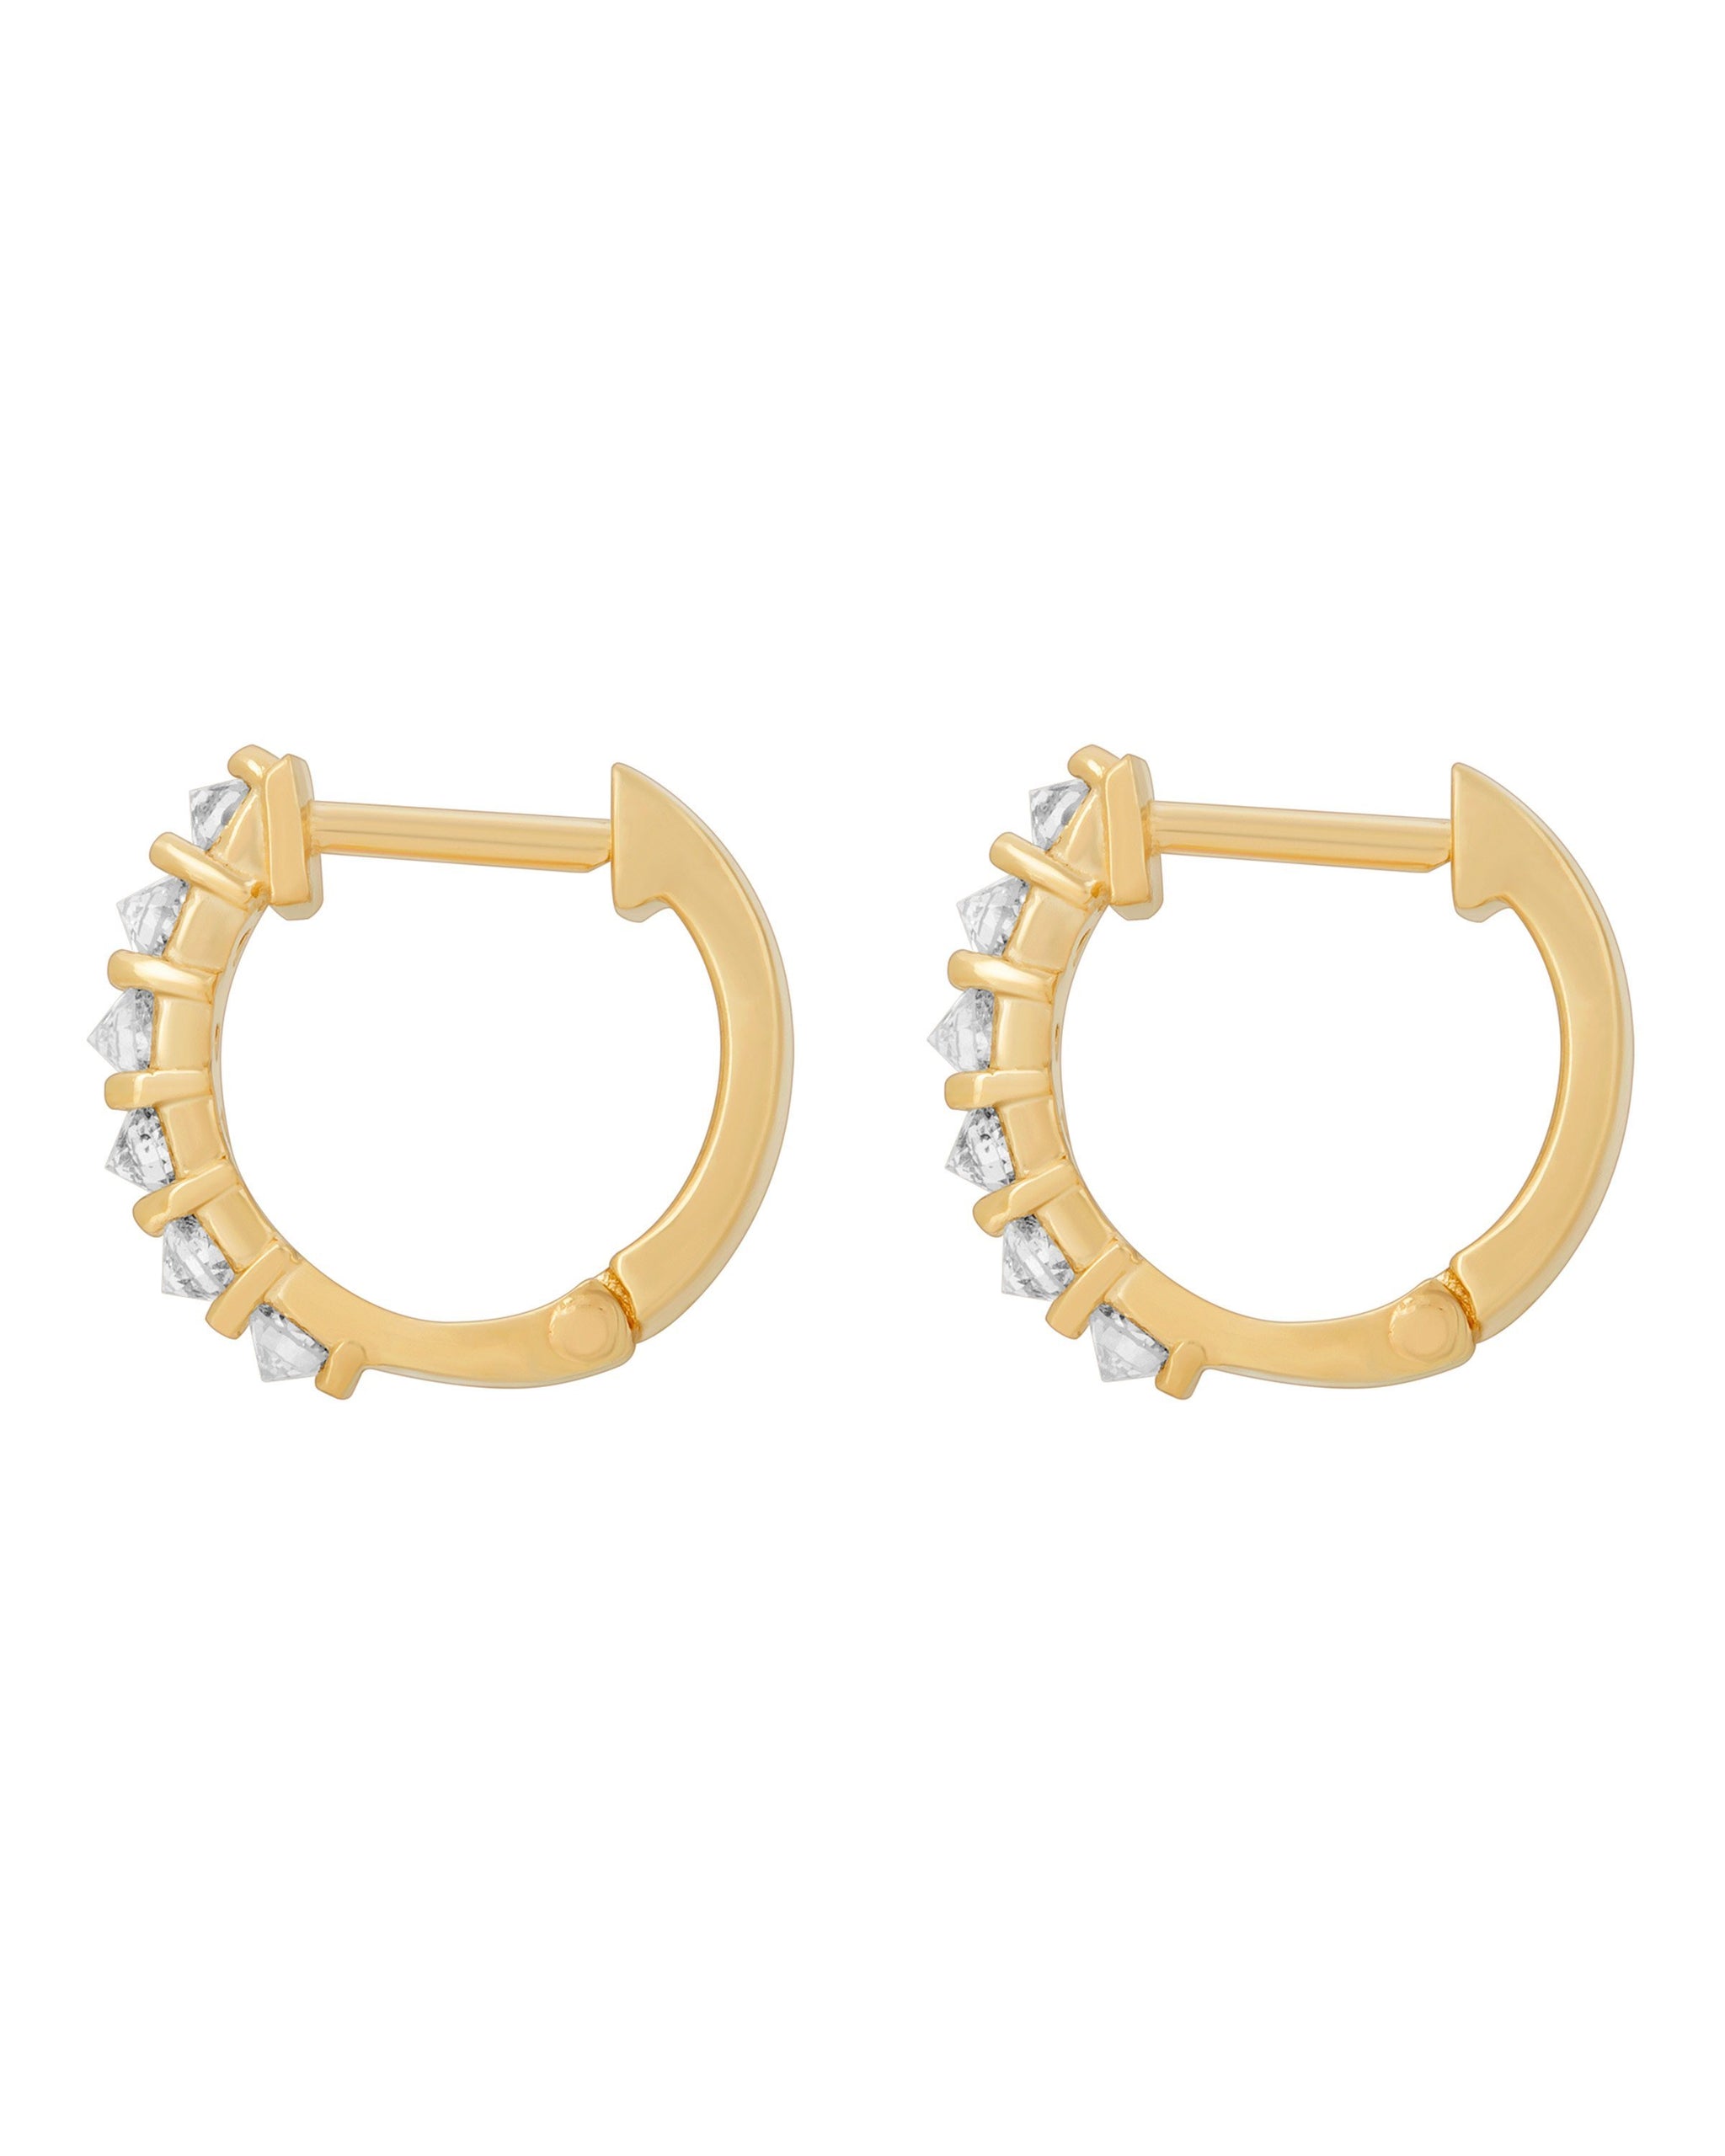 Eclipse Huggies, 14k Yellow Gold 11mm Huggie Hoops with Six White Diamonds per earring, Handmade by Turquoise + Tobacco